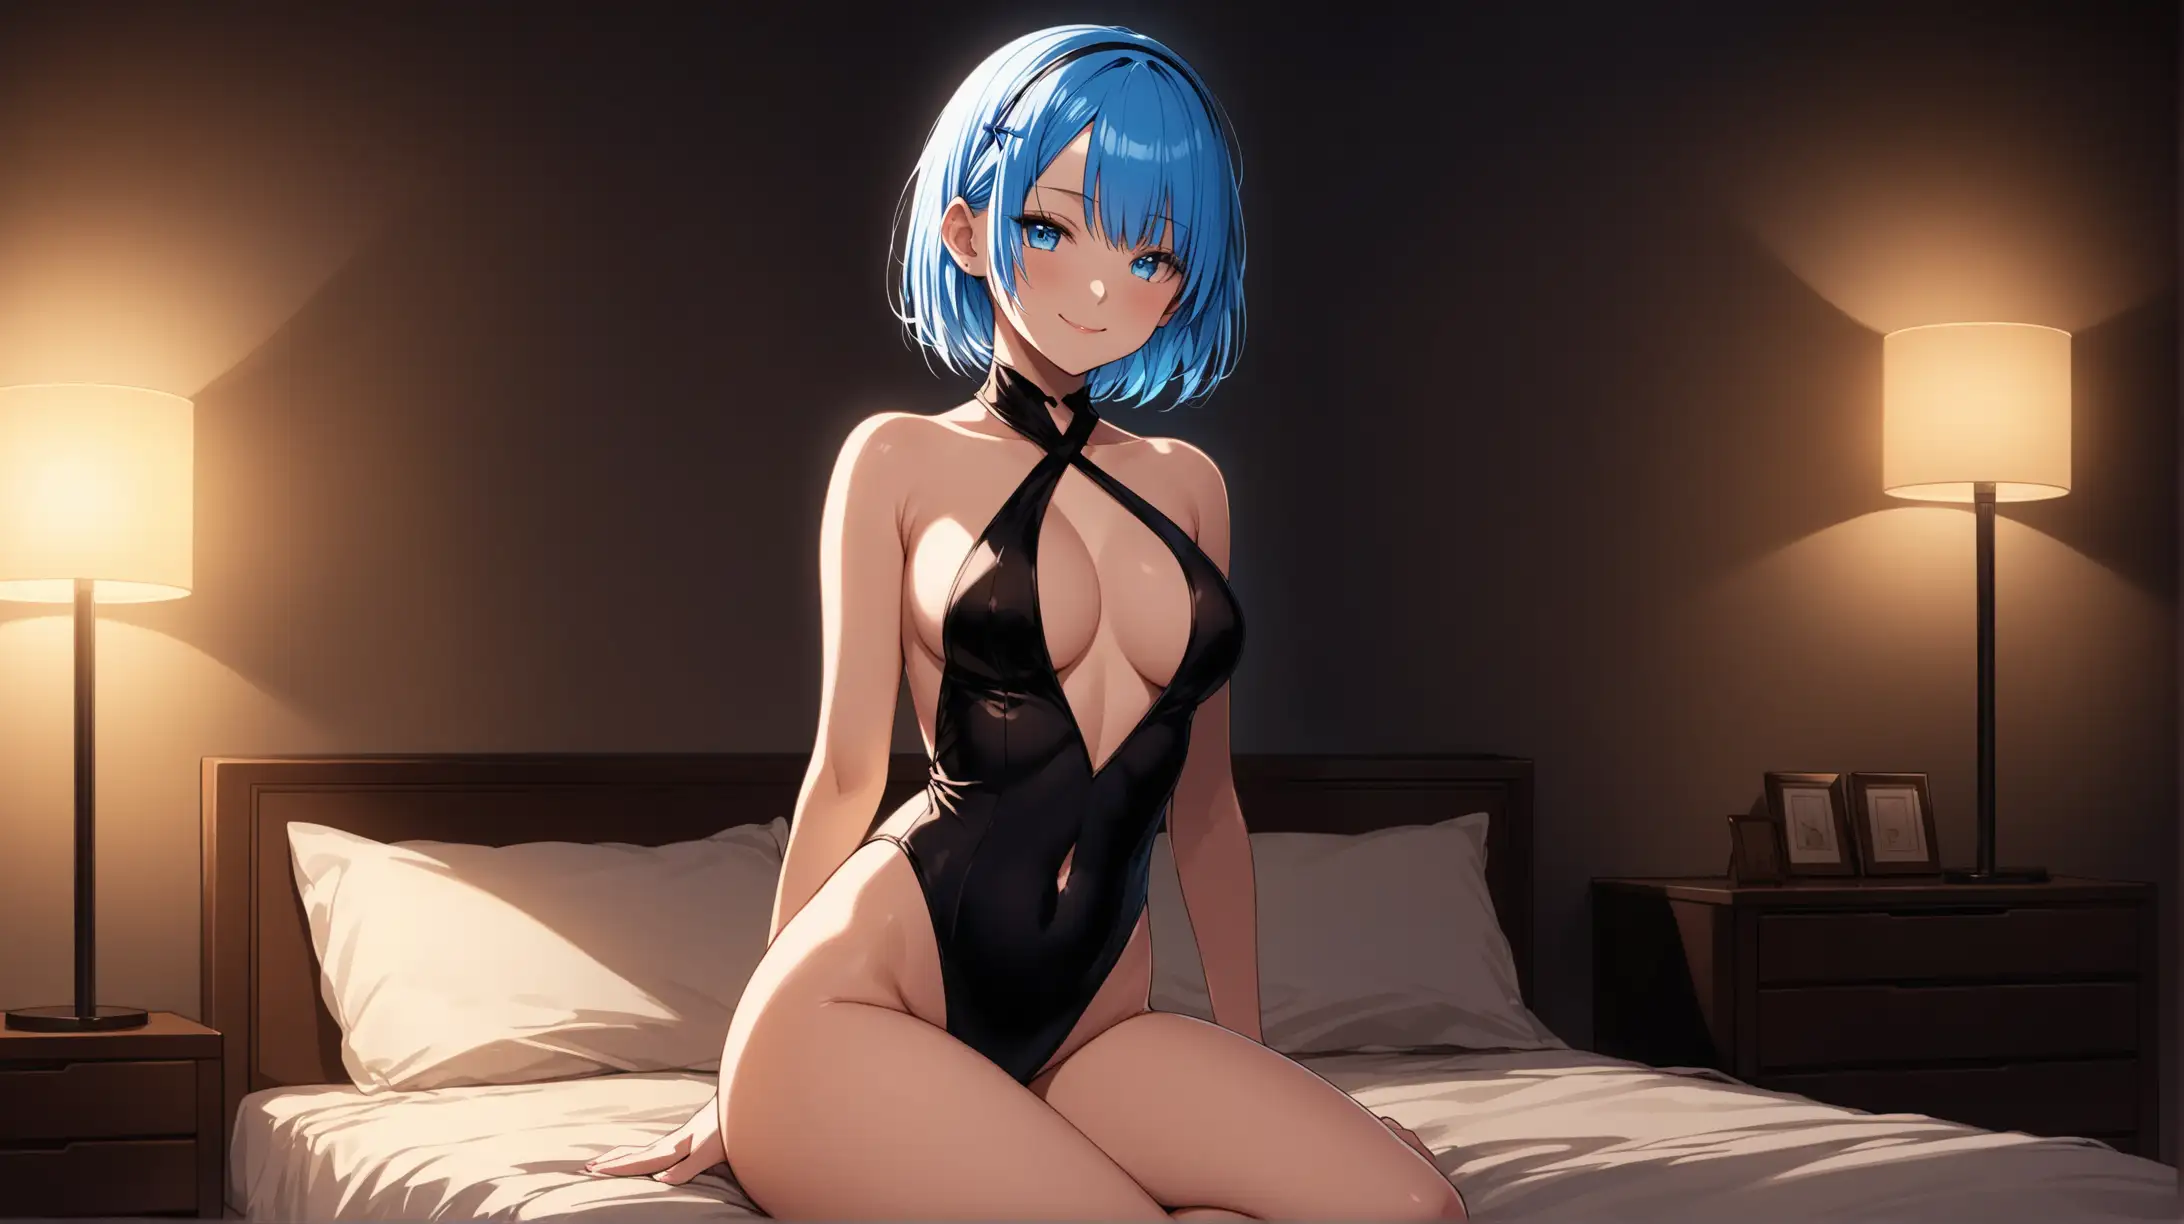 Sultry Rem in Dimly Lit Bedroom Setting